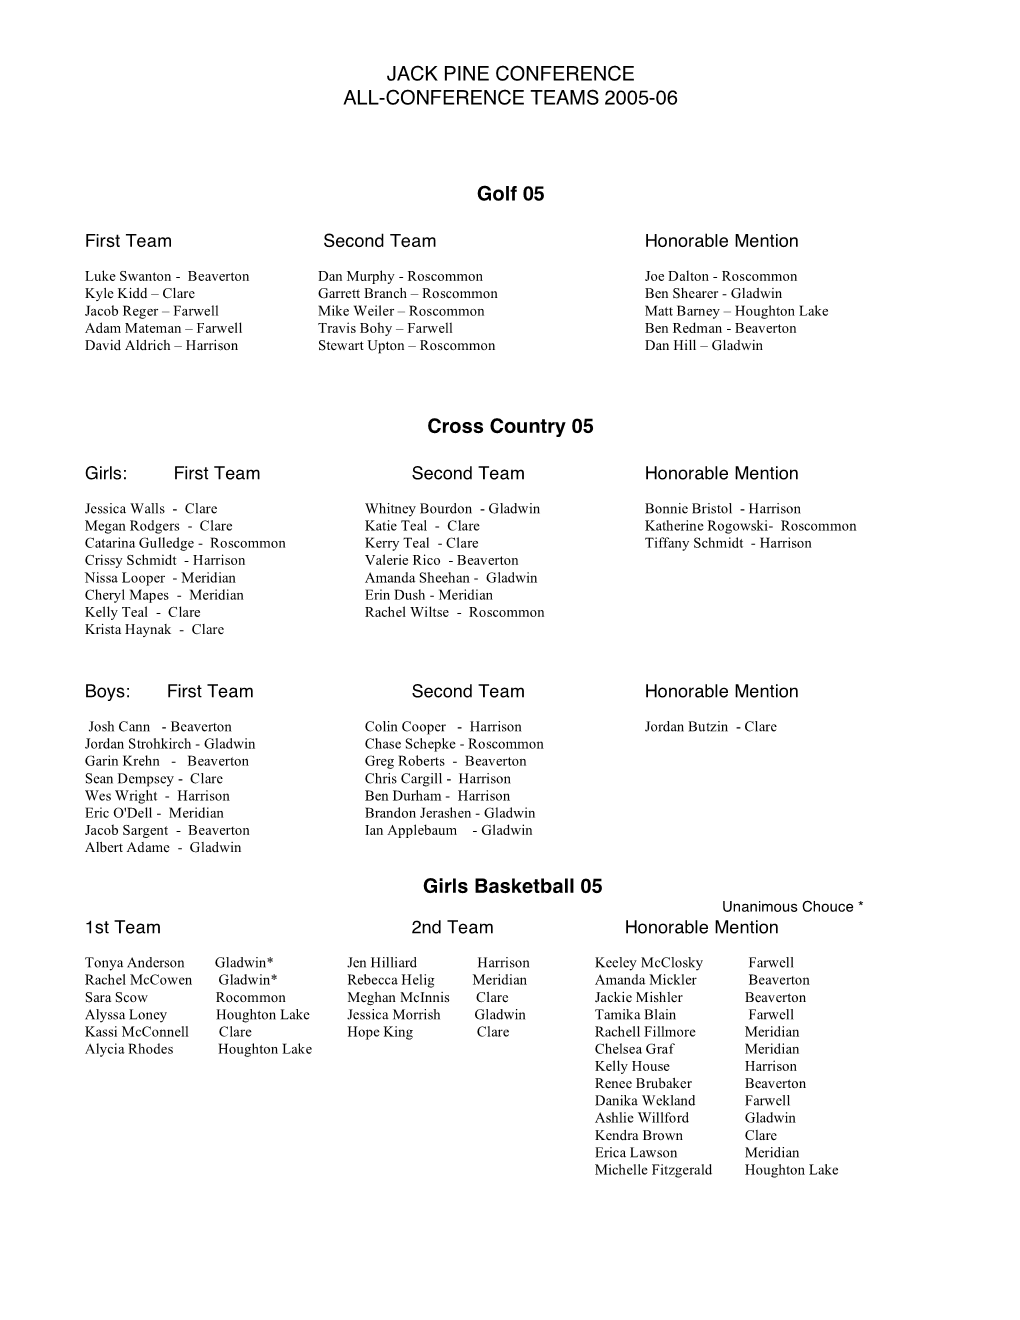 Jack Pine Conference All-Conference Teams 2005-06